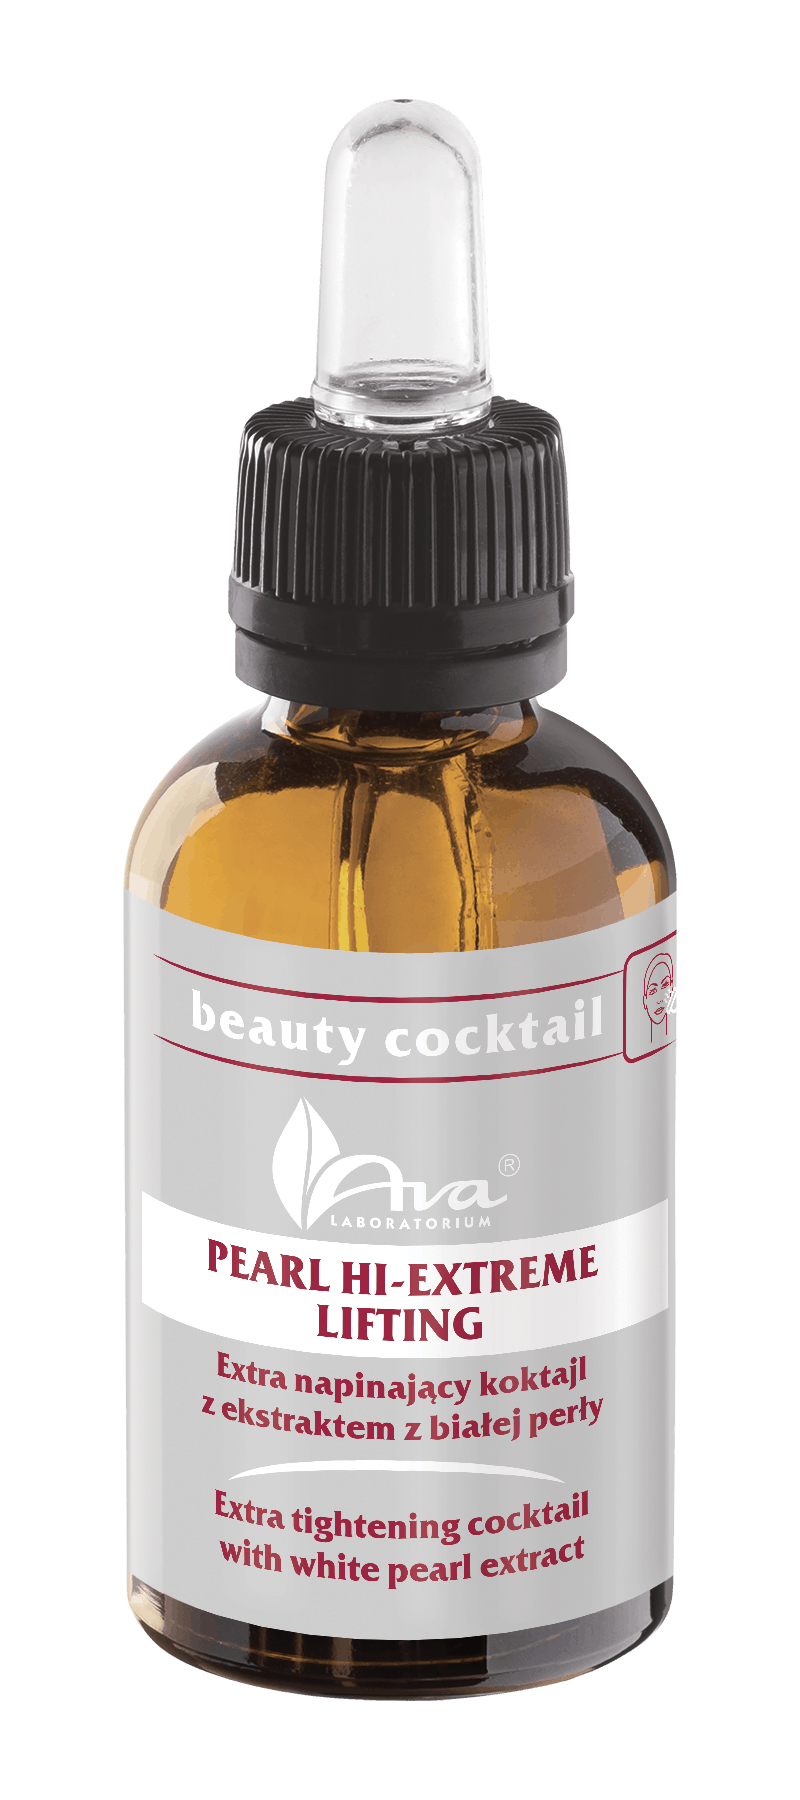 BEAUTY COCKTAIL Pearl hi-extreme lifiting